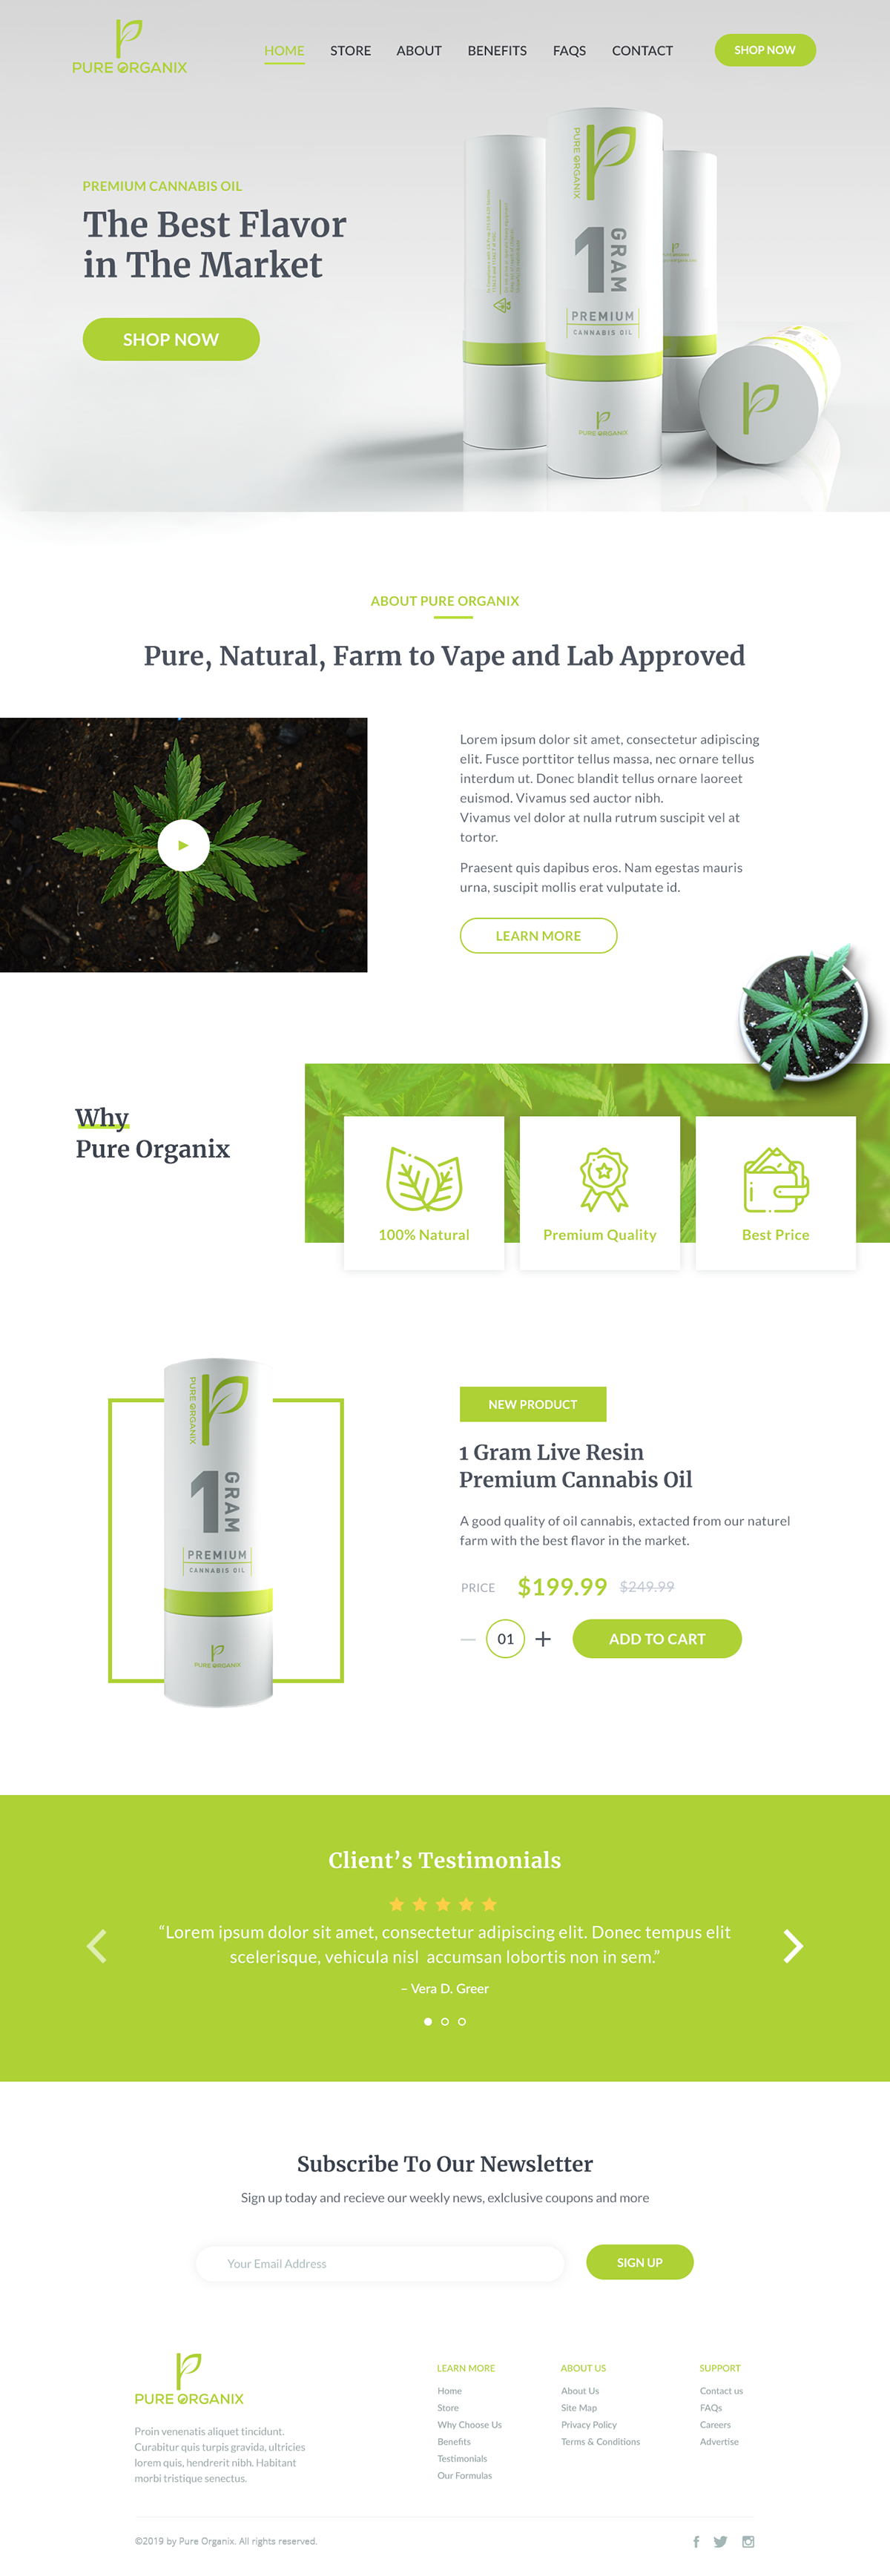 Website design ux UI cannibis frontend brand product business Startup